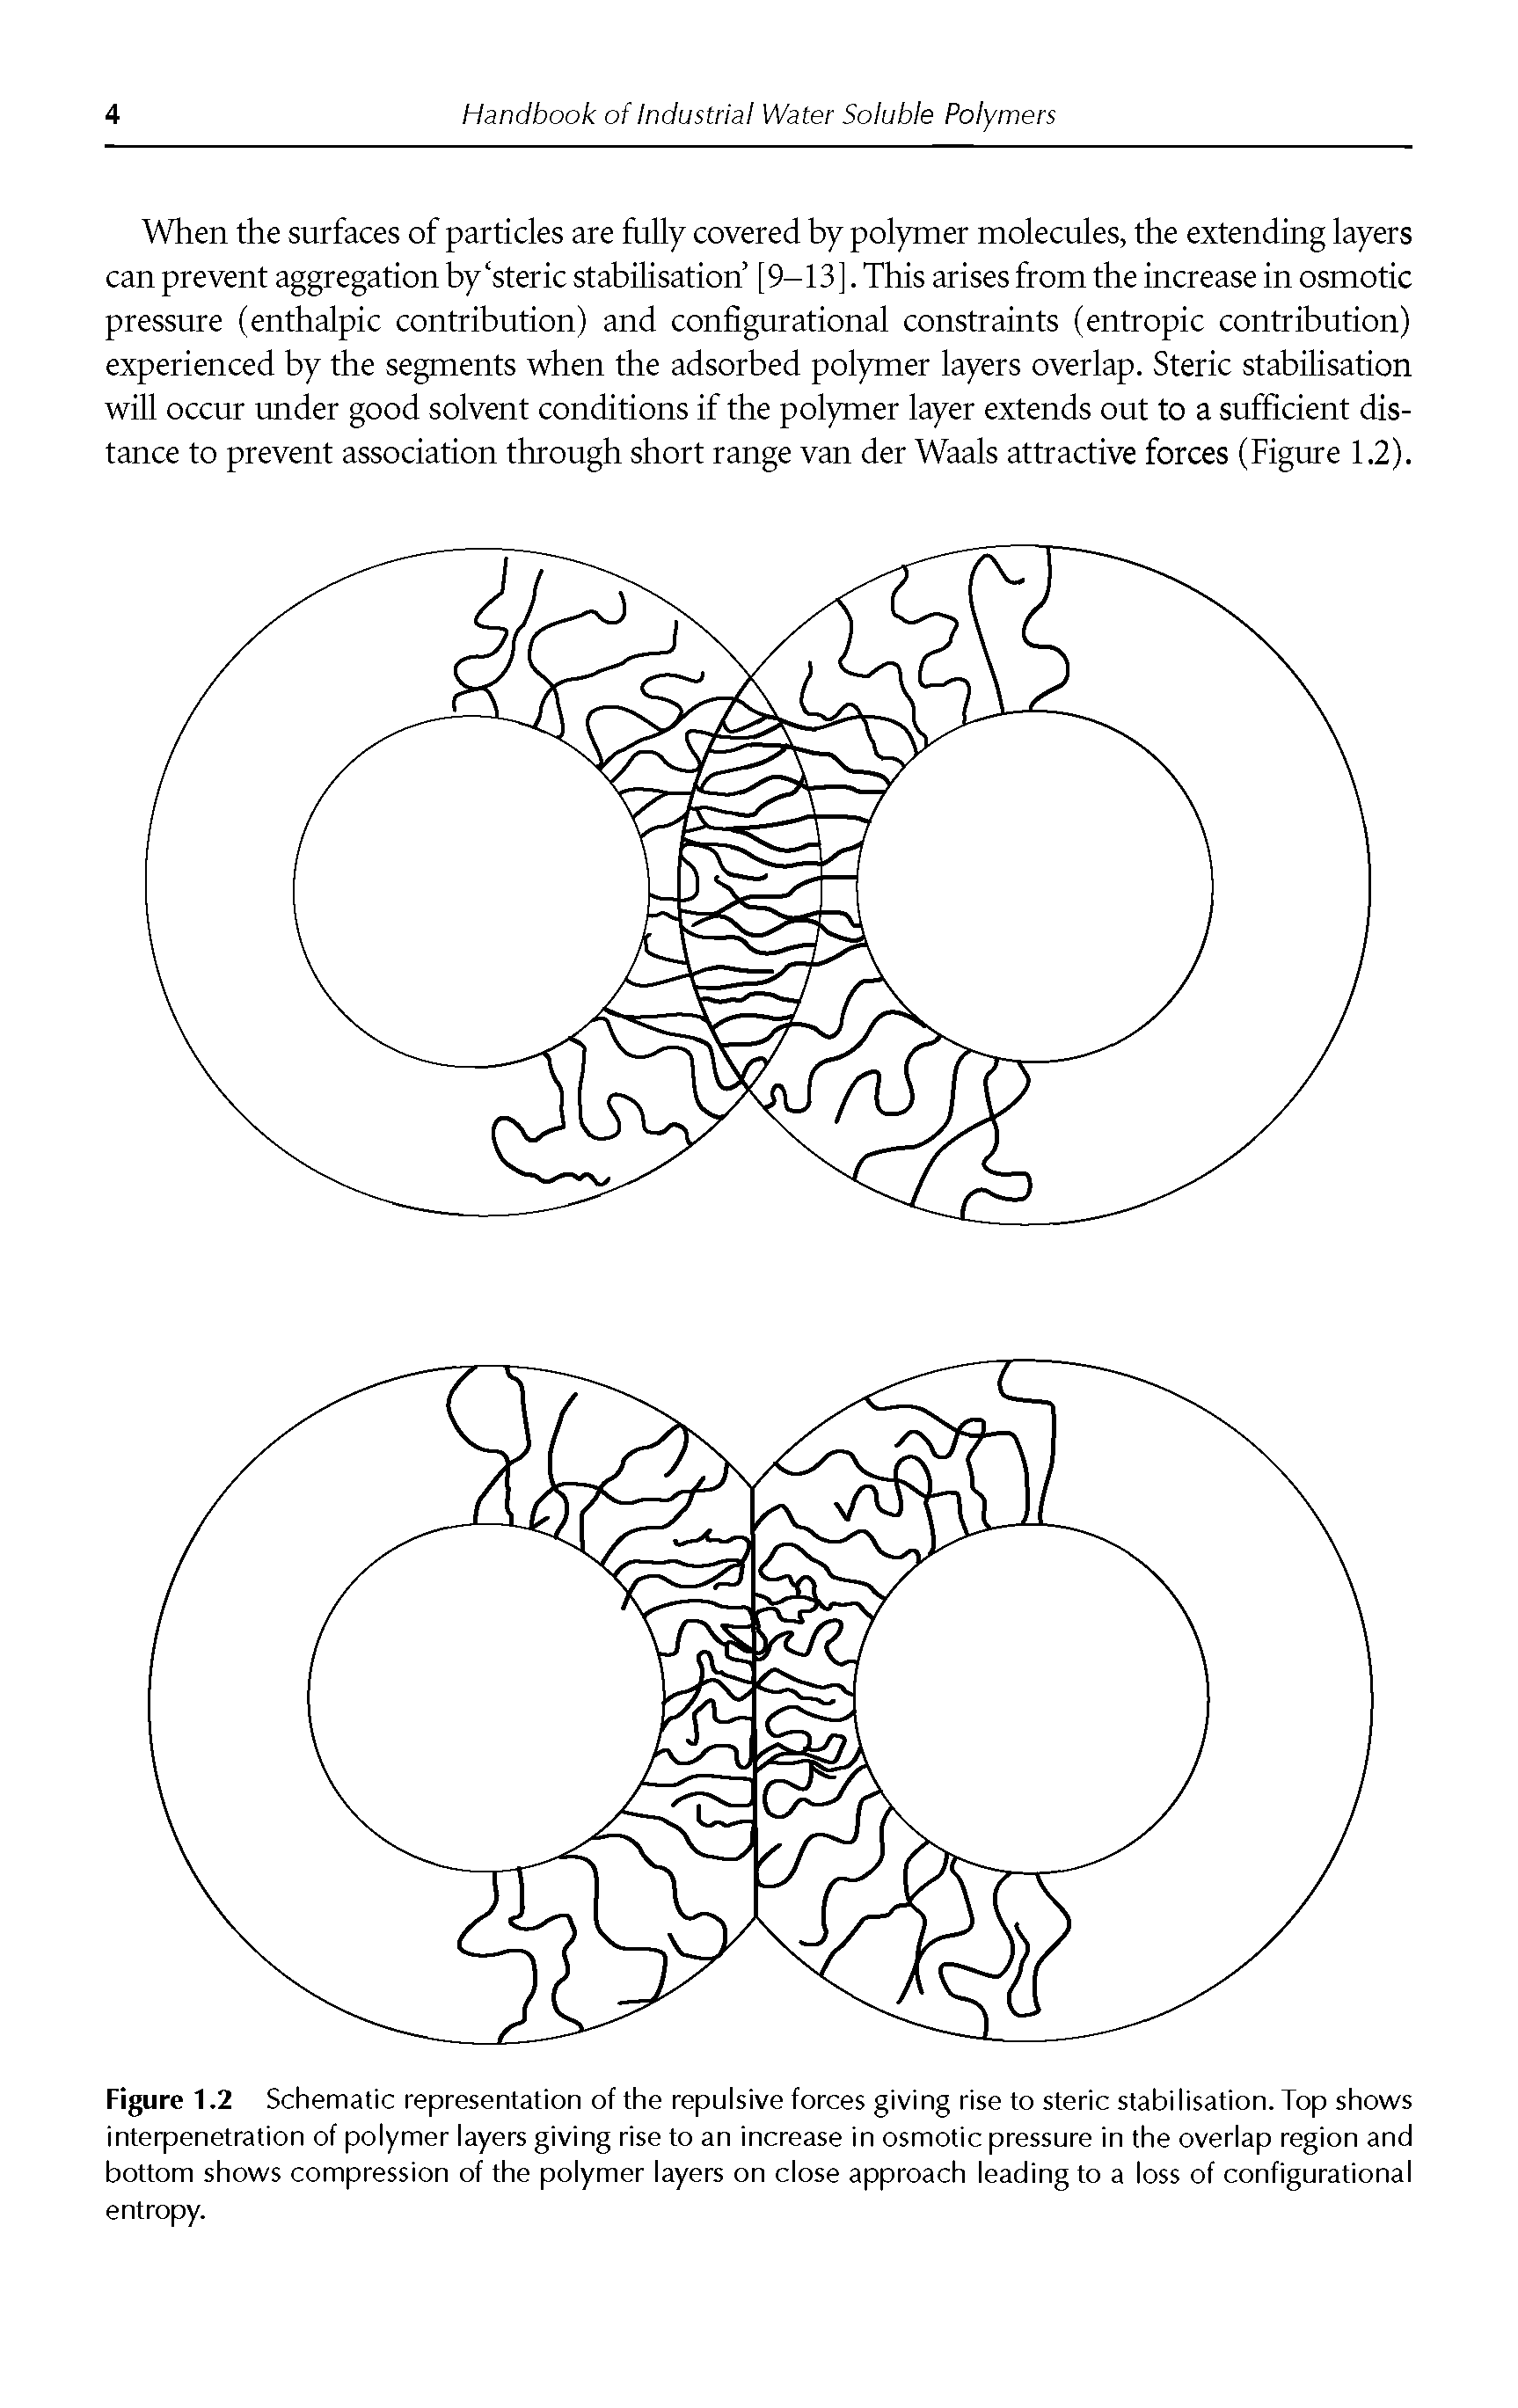 Figure 1.2 Schematic representation of the repulsive forces giving rise to steric stabilisation. Top shows interpenetration of polymer layers giving rise to an increase in osmotic pressure in the overlap region and bottom shows compression of the polymer layers on close approach leading to a loss of configurational entropy.